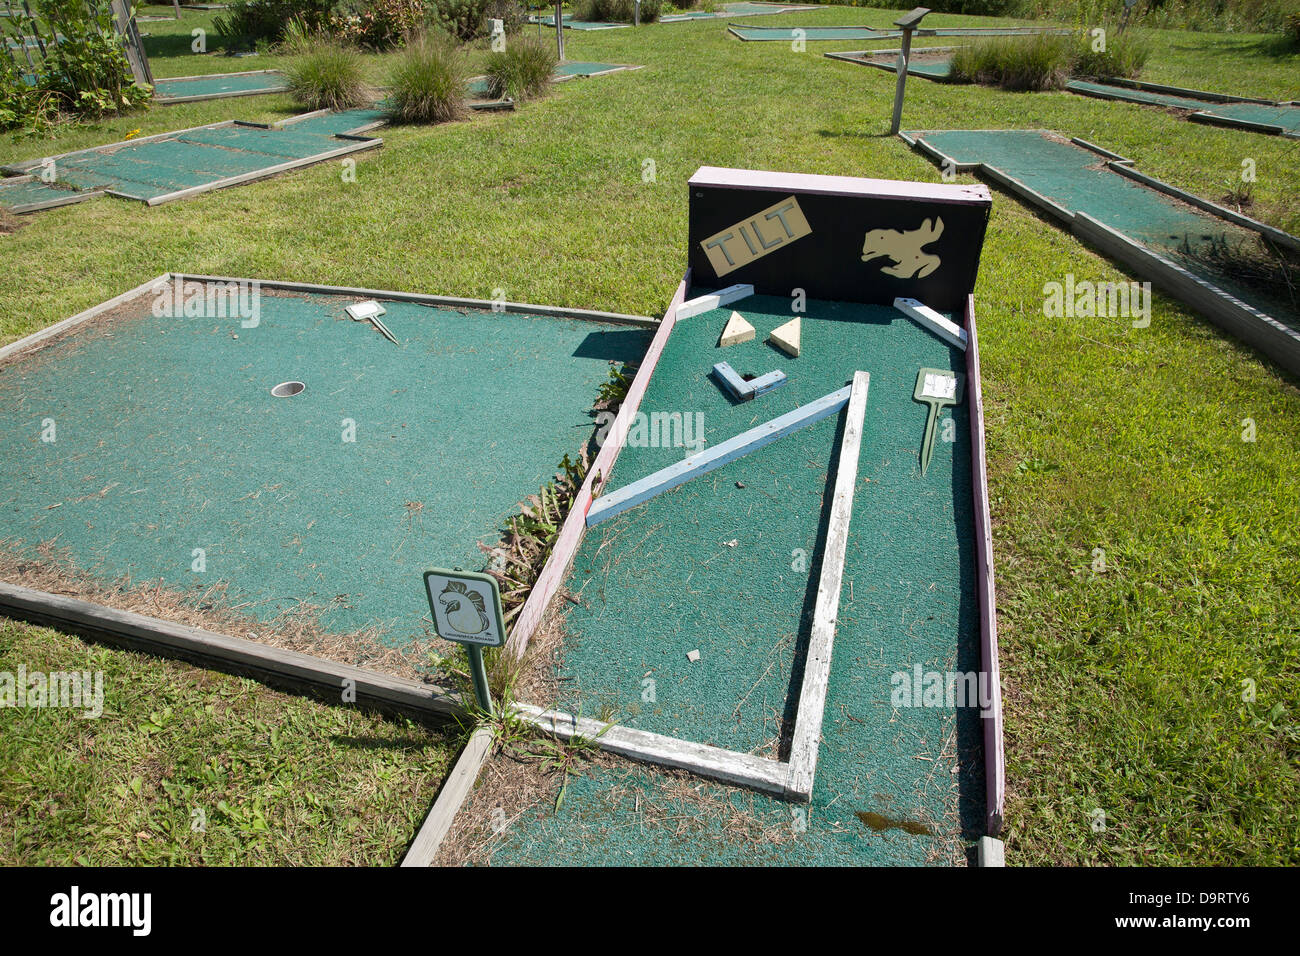 An abandoned miniature golf course in a small town in upstate New York. Stock Photo